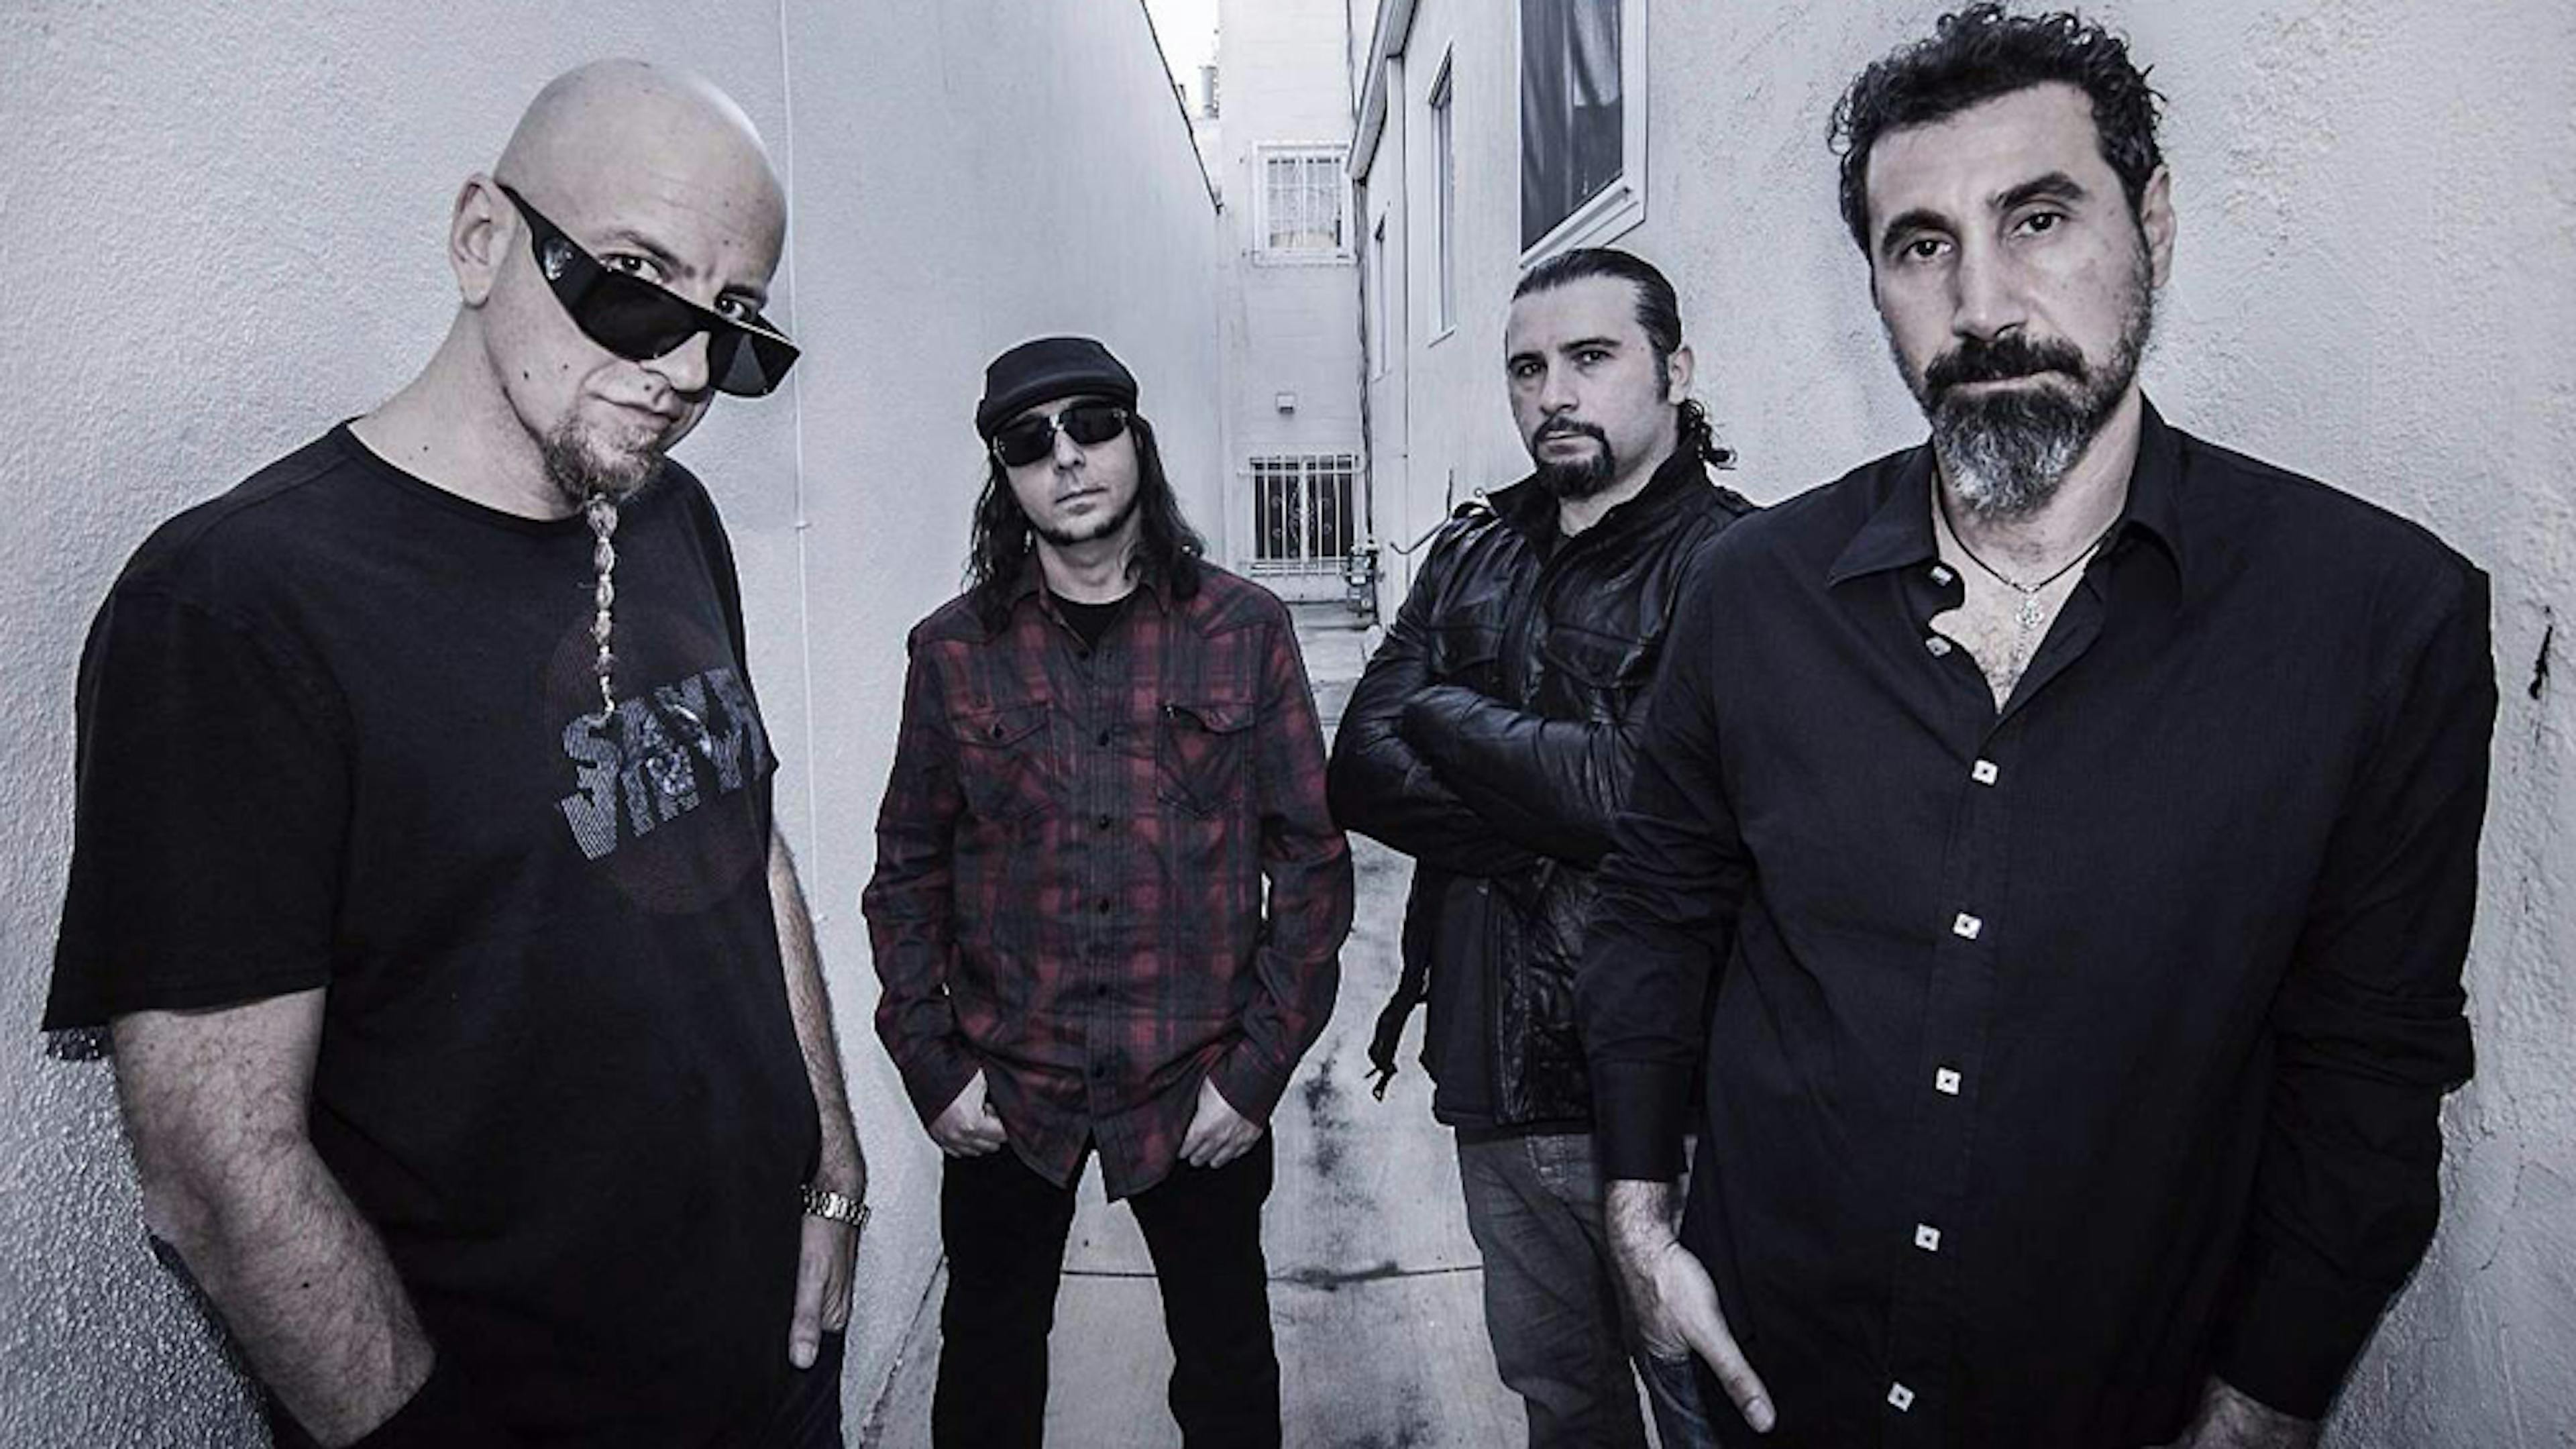 Serj Tankian is “open” to more SOAD shows: “Just one-offs, or maybe a handful of one-offs”